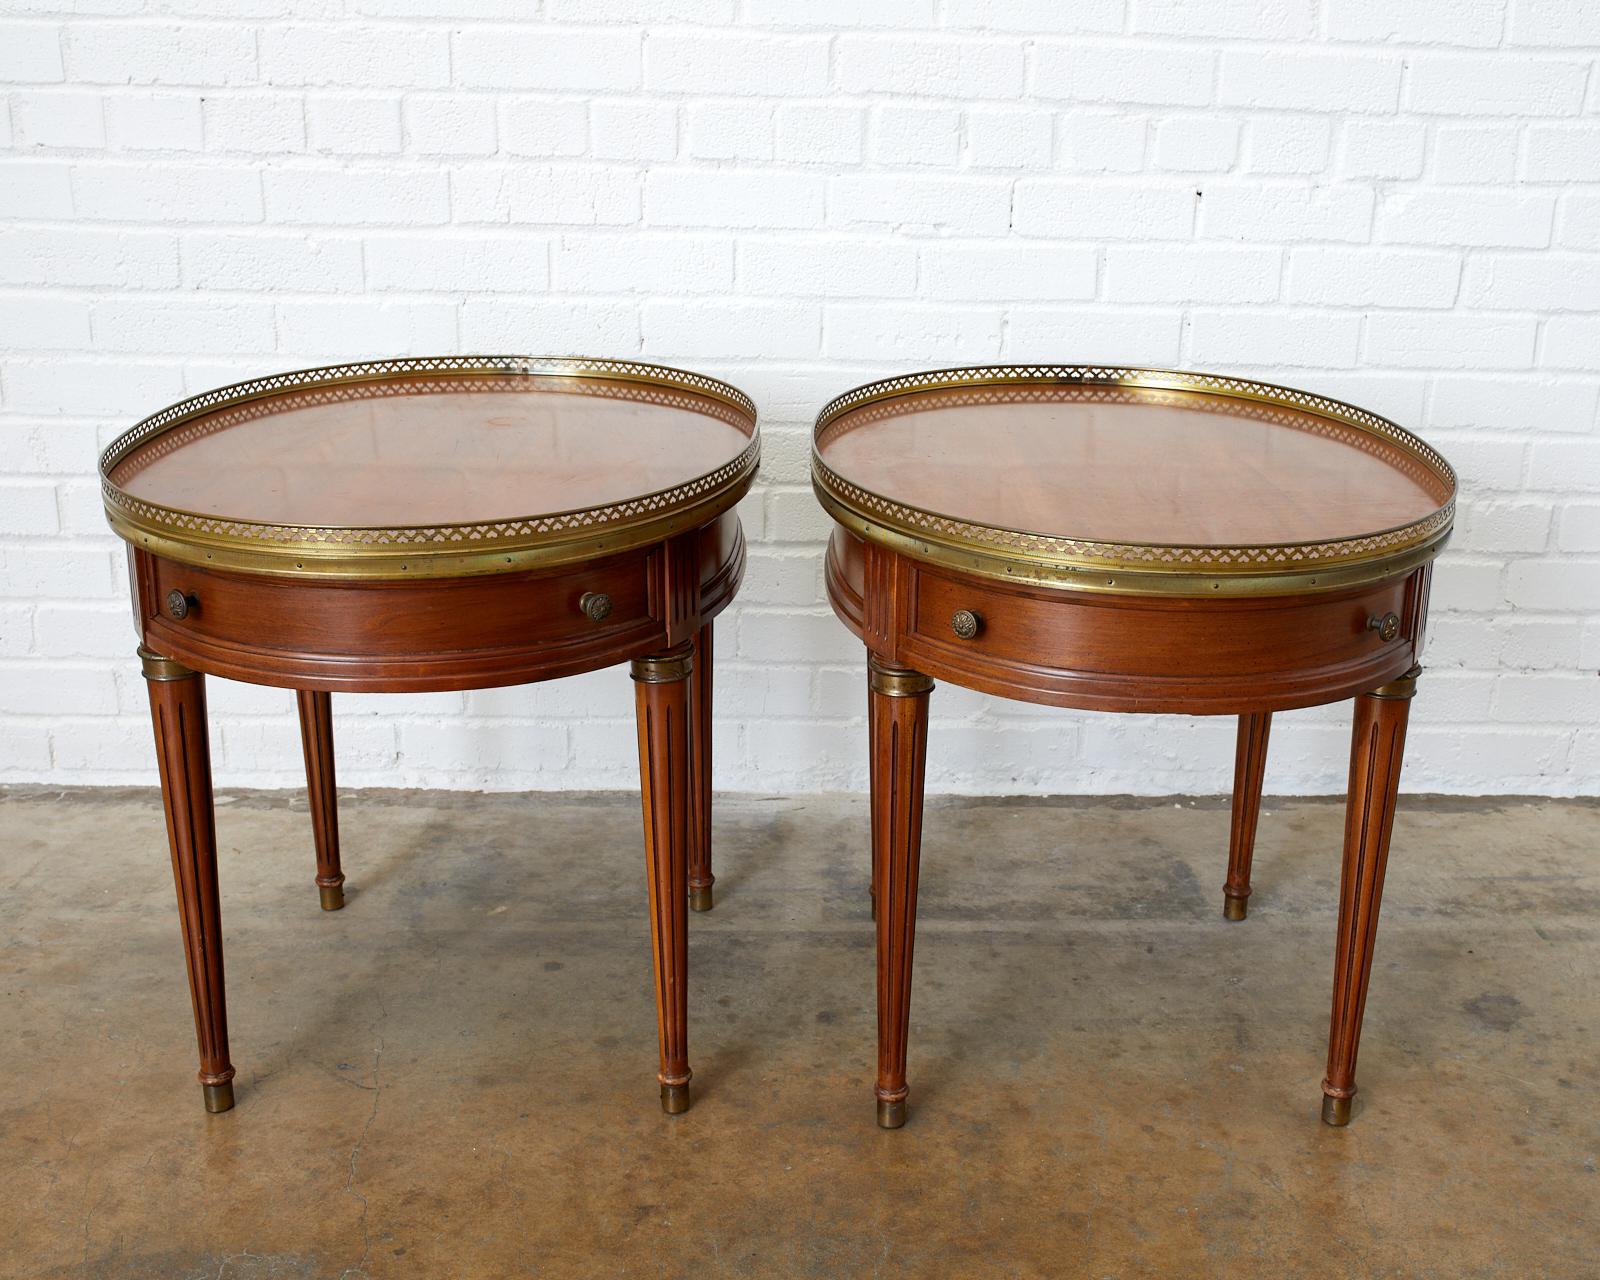 Elegant matching pair of oval Bouillotte side tables or drinks tables made in the French Louis XVI taste. Features a pierced brass galleried edge and brass mounts on the tapered legs ending with brass sabot feet. Each table has a drawer on one end